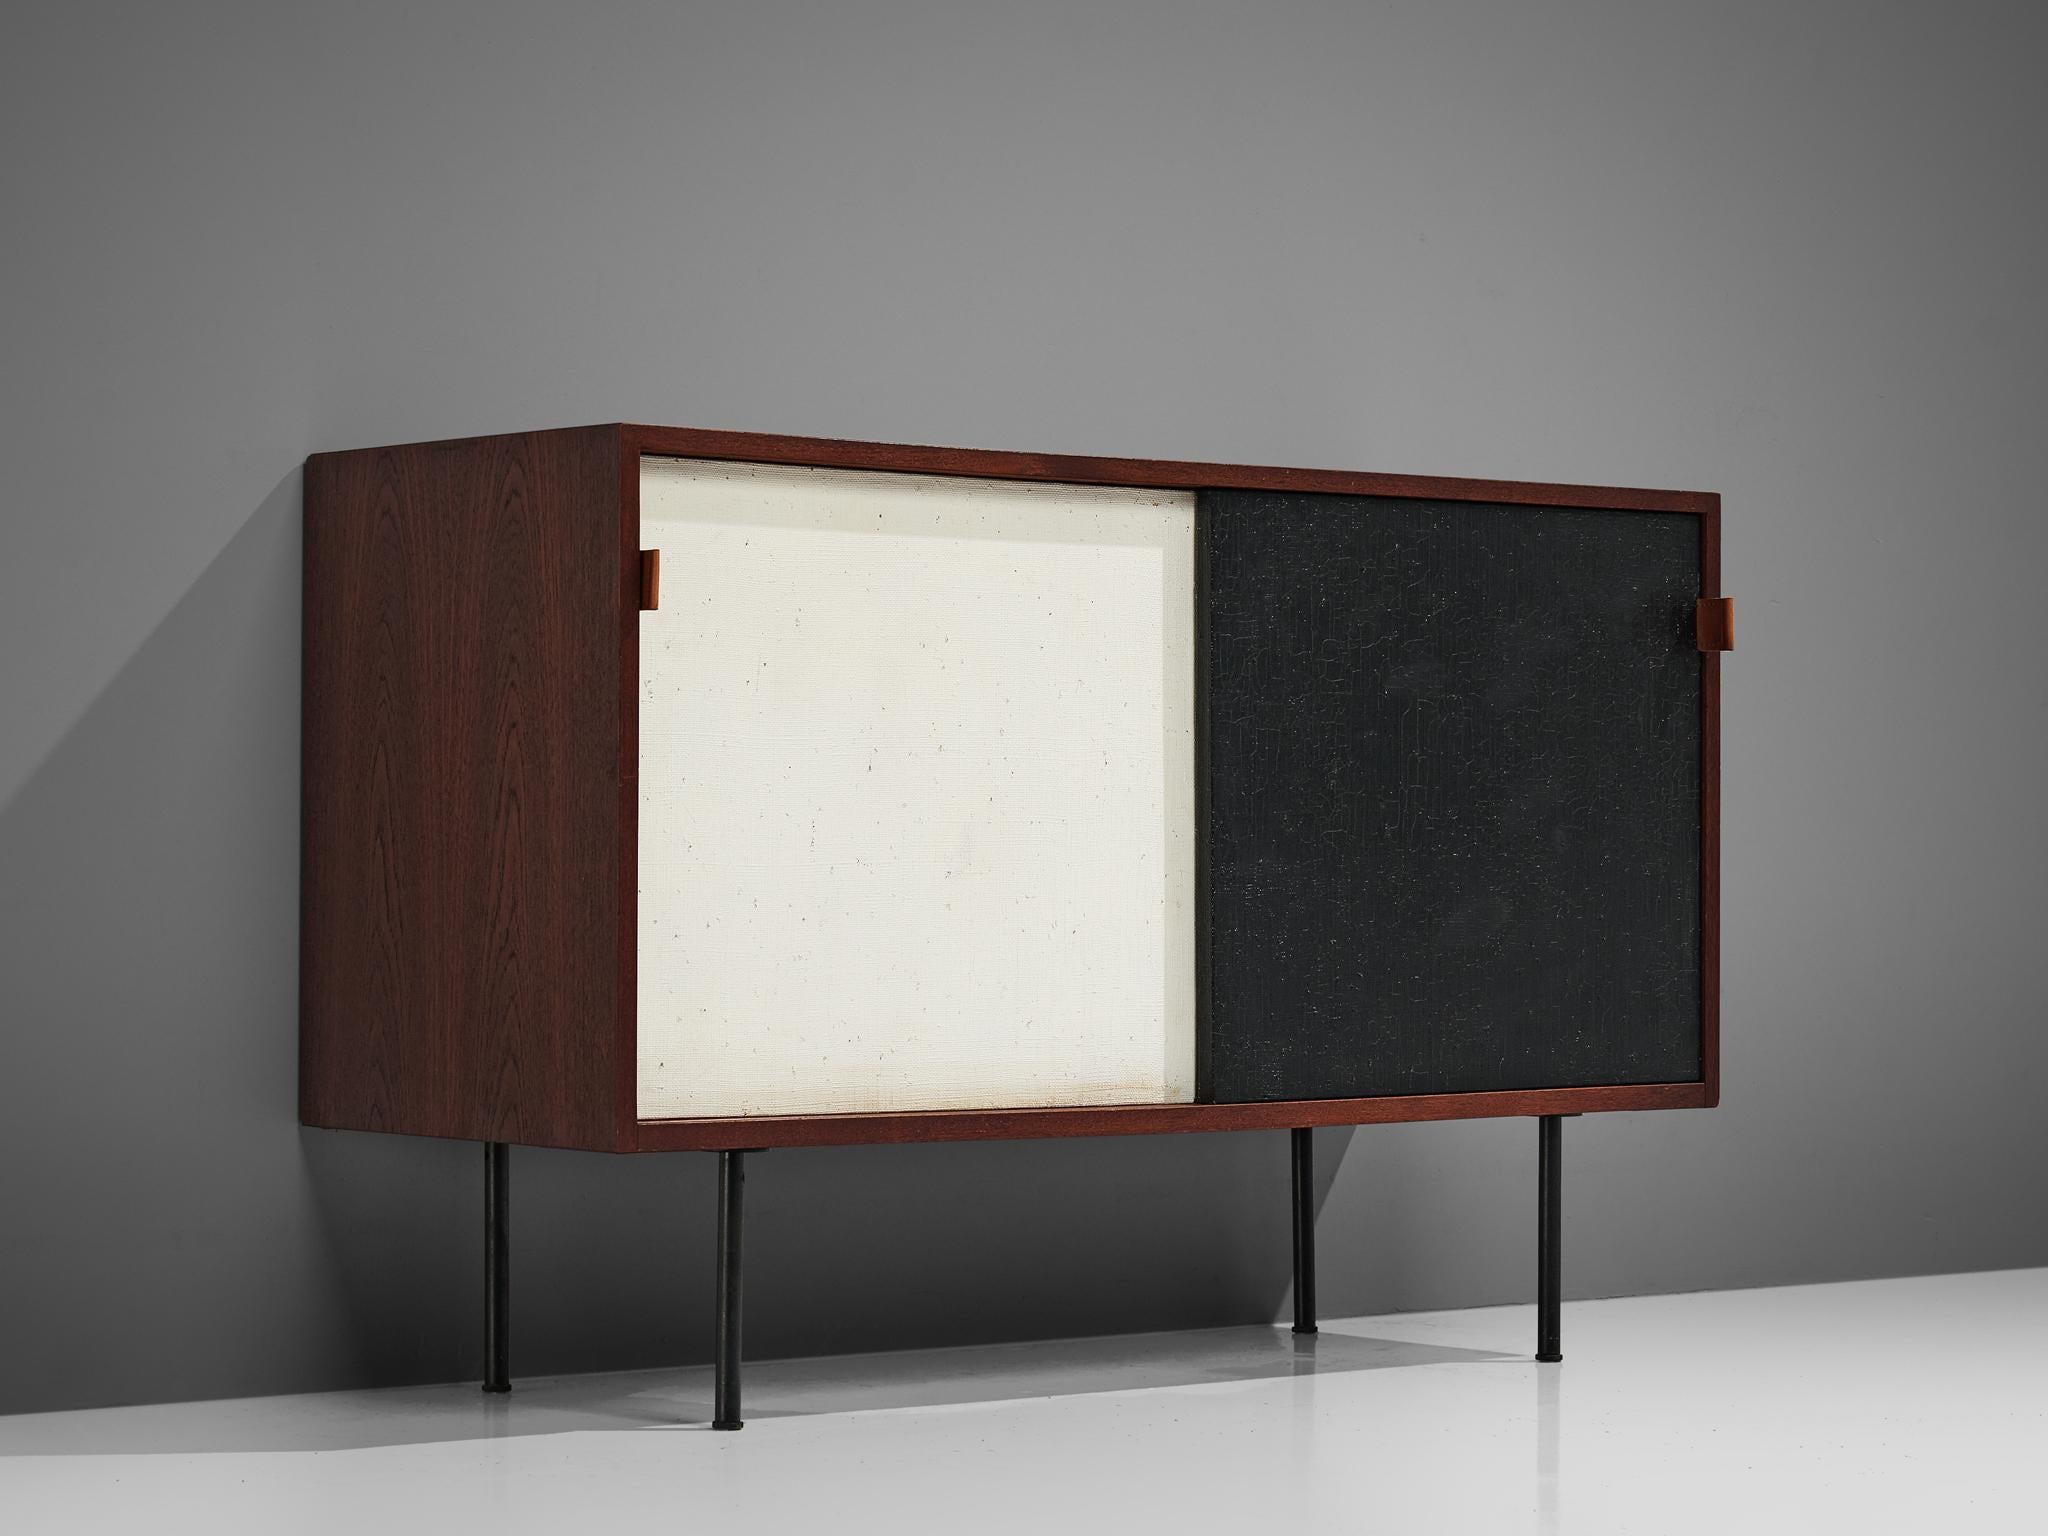 Florence Knoll for Knoll International, sideboard, teak, metal feet, leather straps, Germany, produced 1986, designed 1960s

Sideboard in teak with two sliding doors in black and white. The credenza is equipped with two shelves on the right and